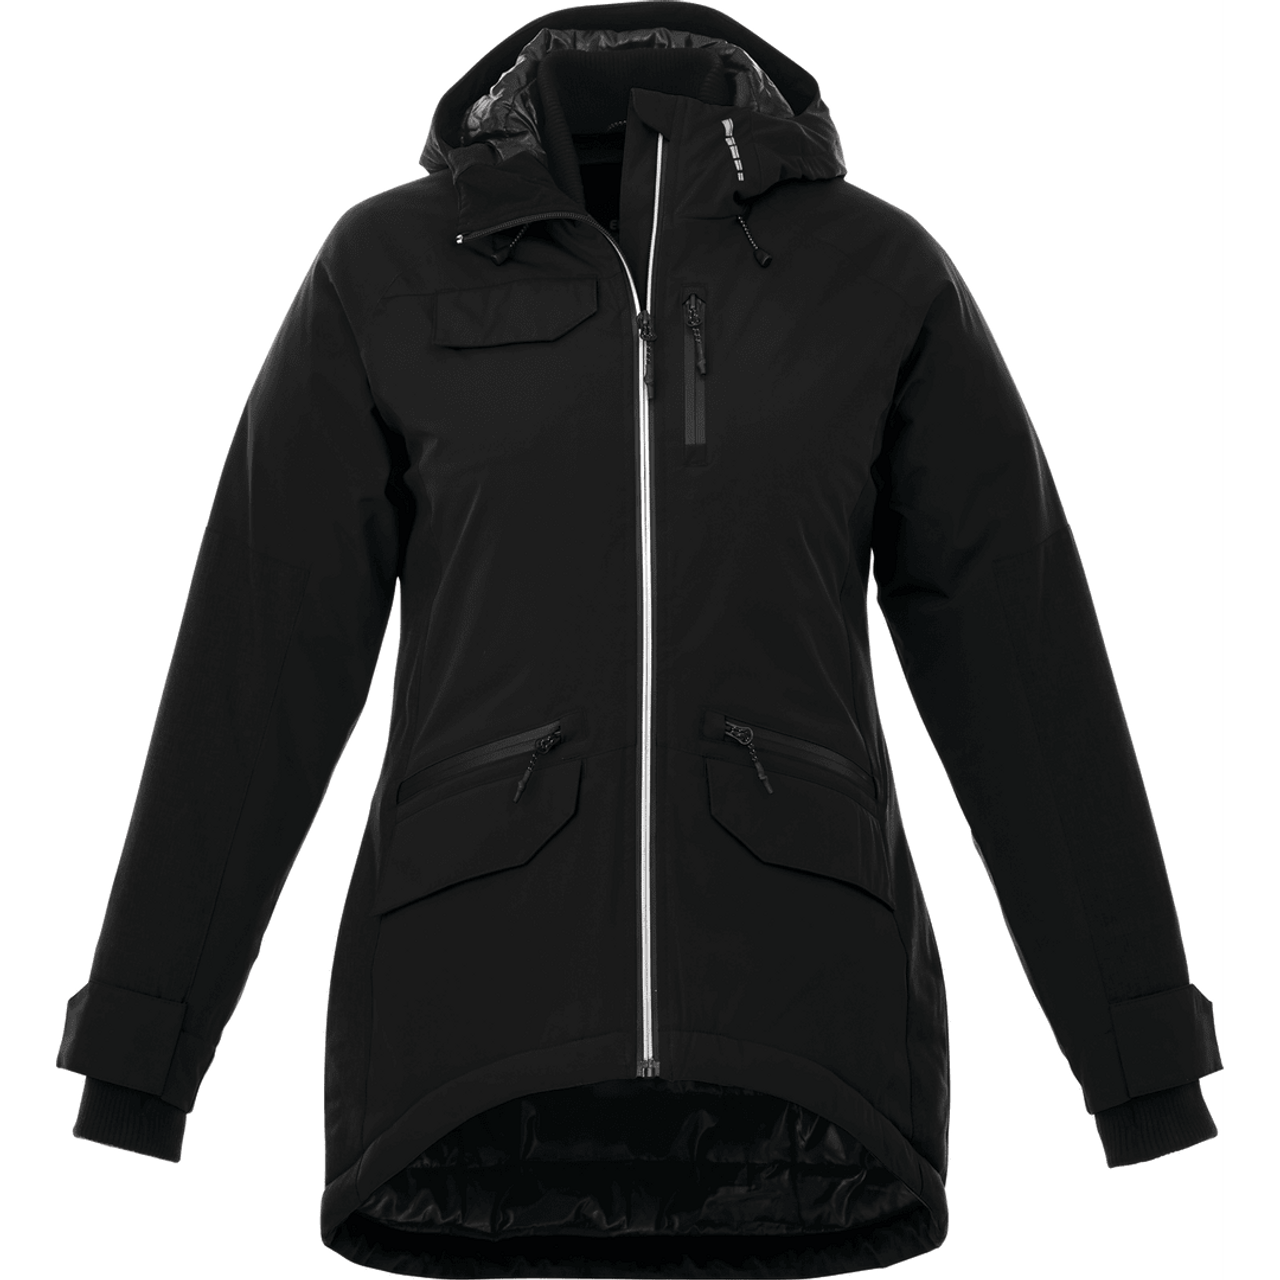 Embroidered Womens BRECKENRIDGE Insulated Jacket